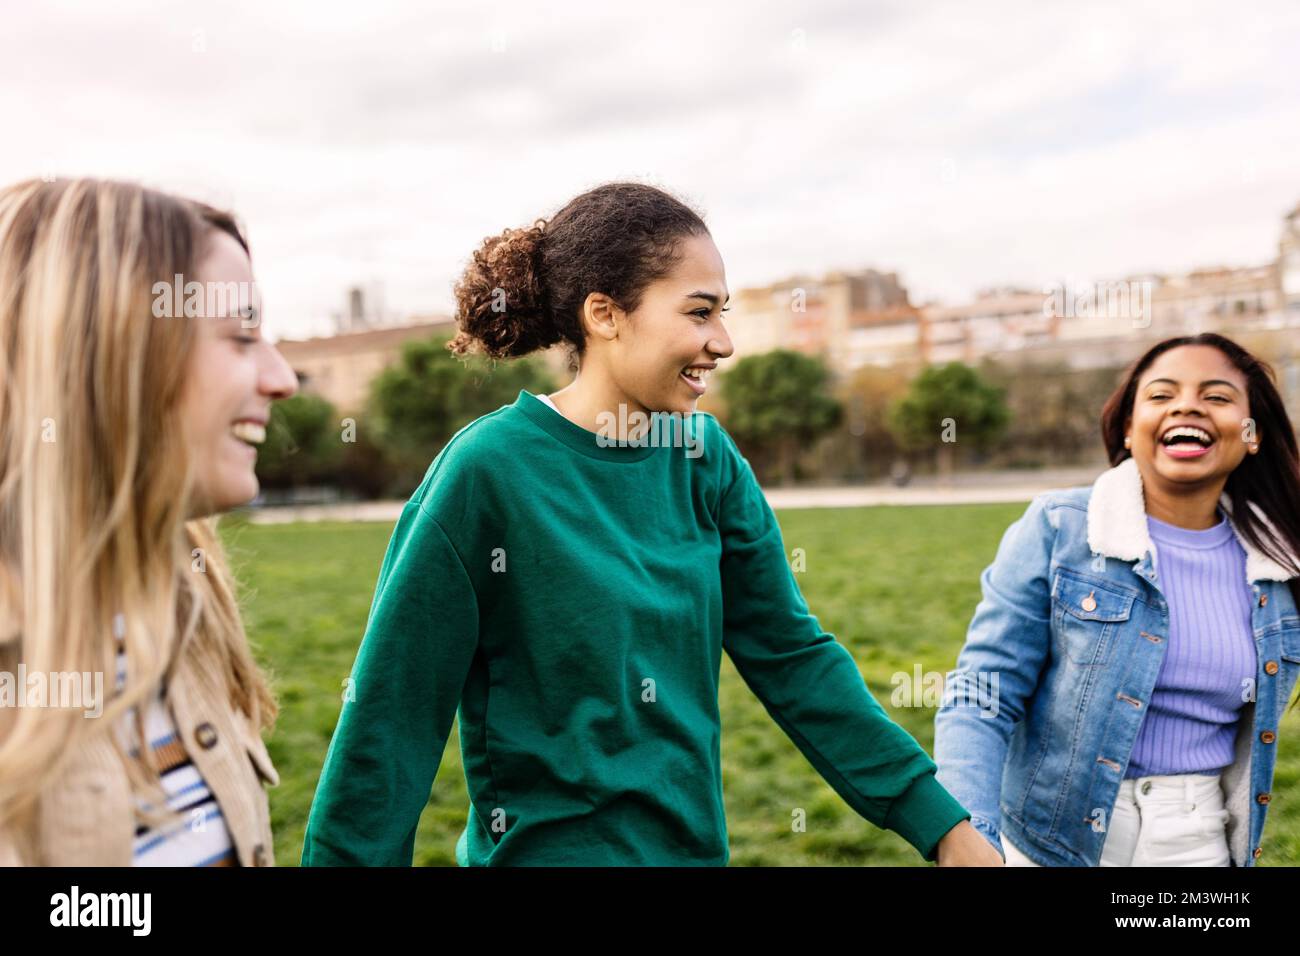 Muslim young woman having fun with diverse female friends outdoors Stock Photo